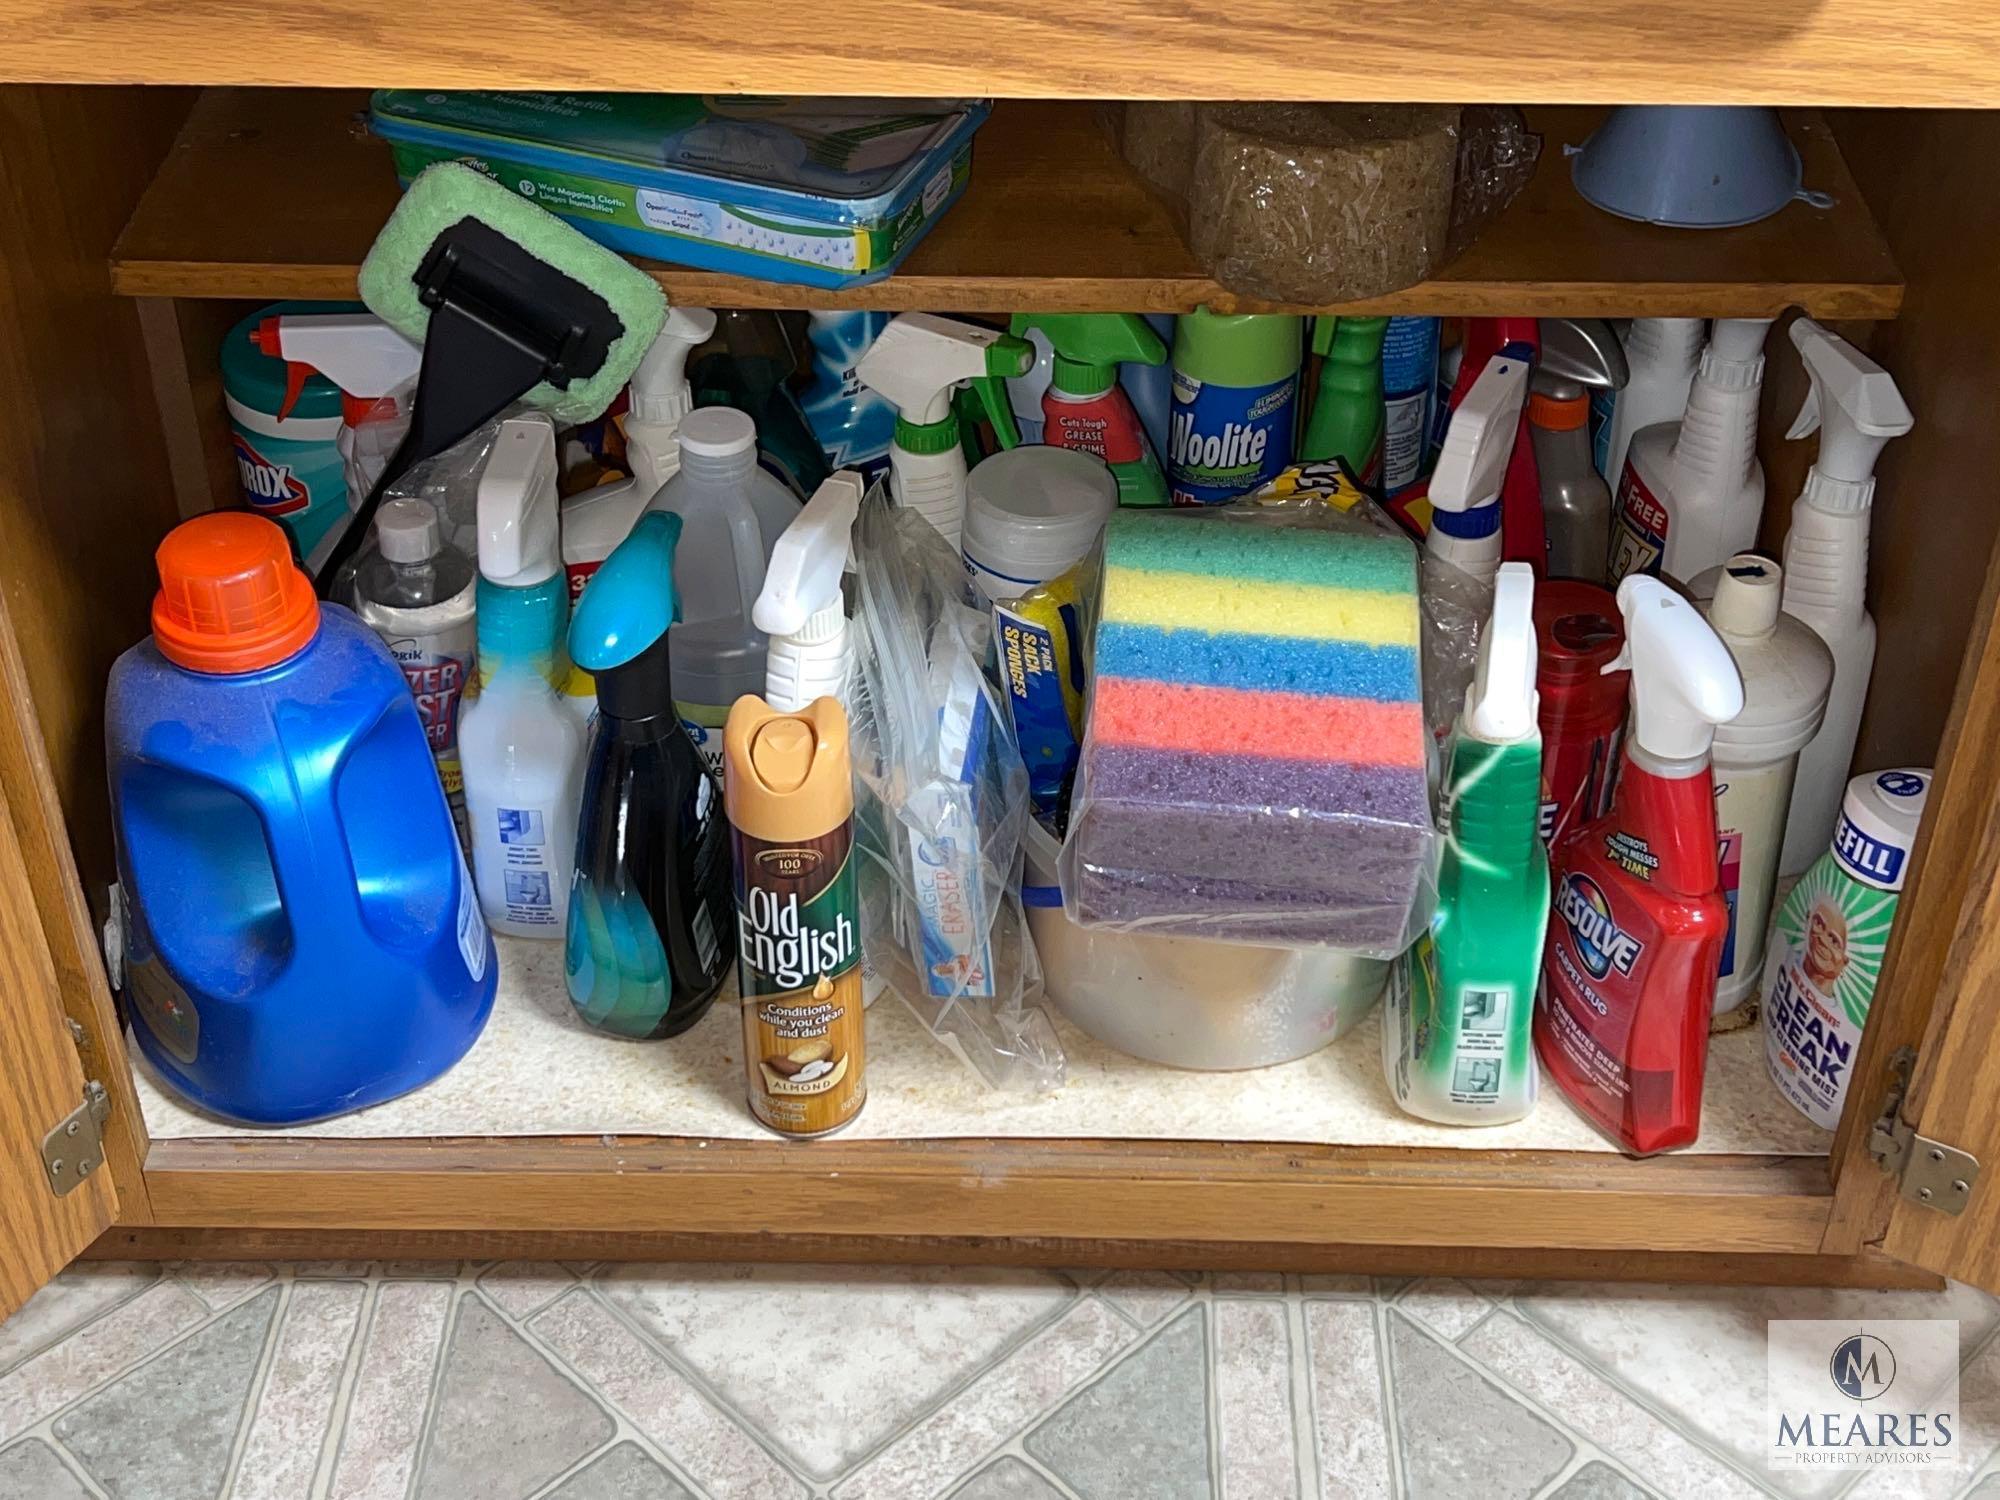 Contents of Laundry Room Cabinets - Top Left Side